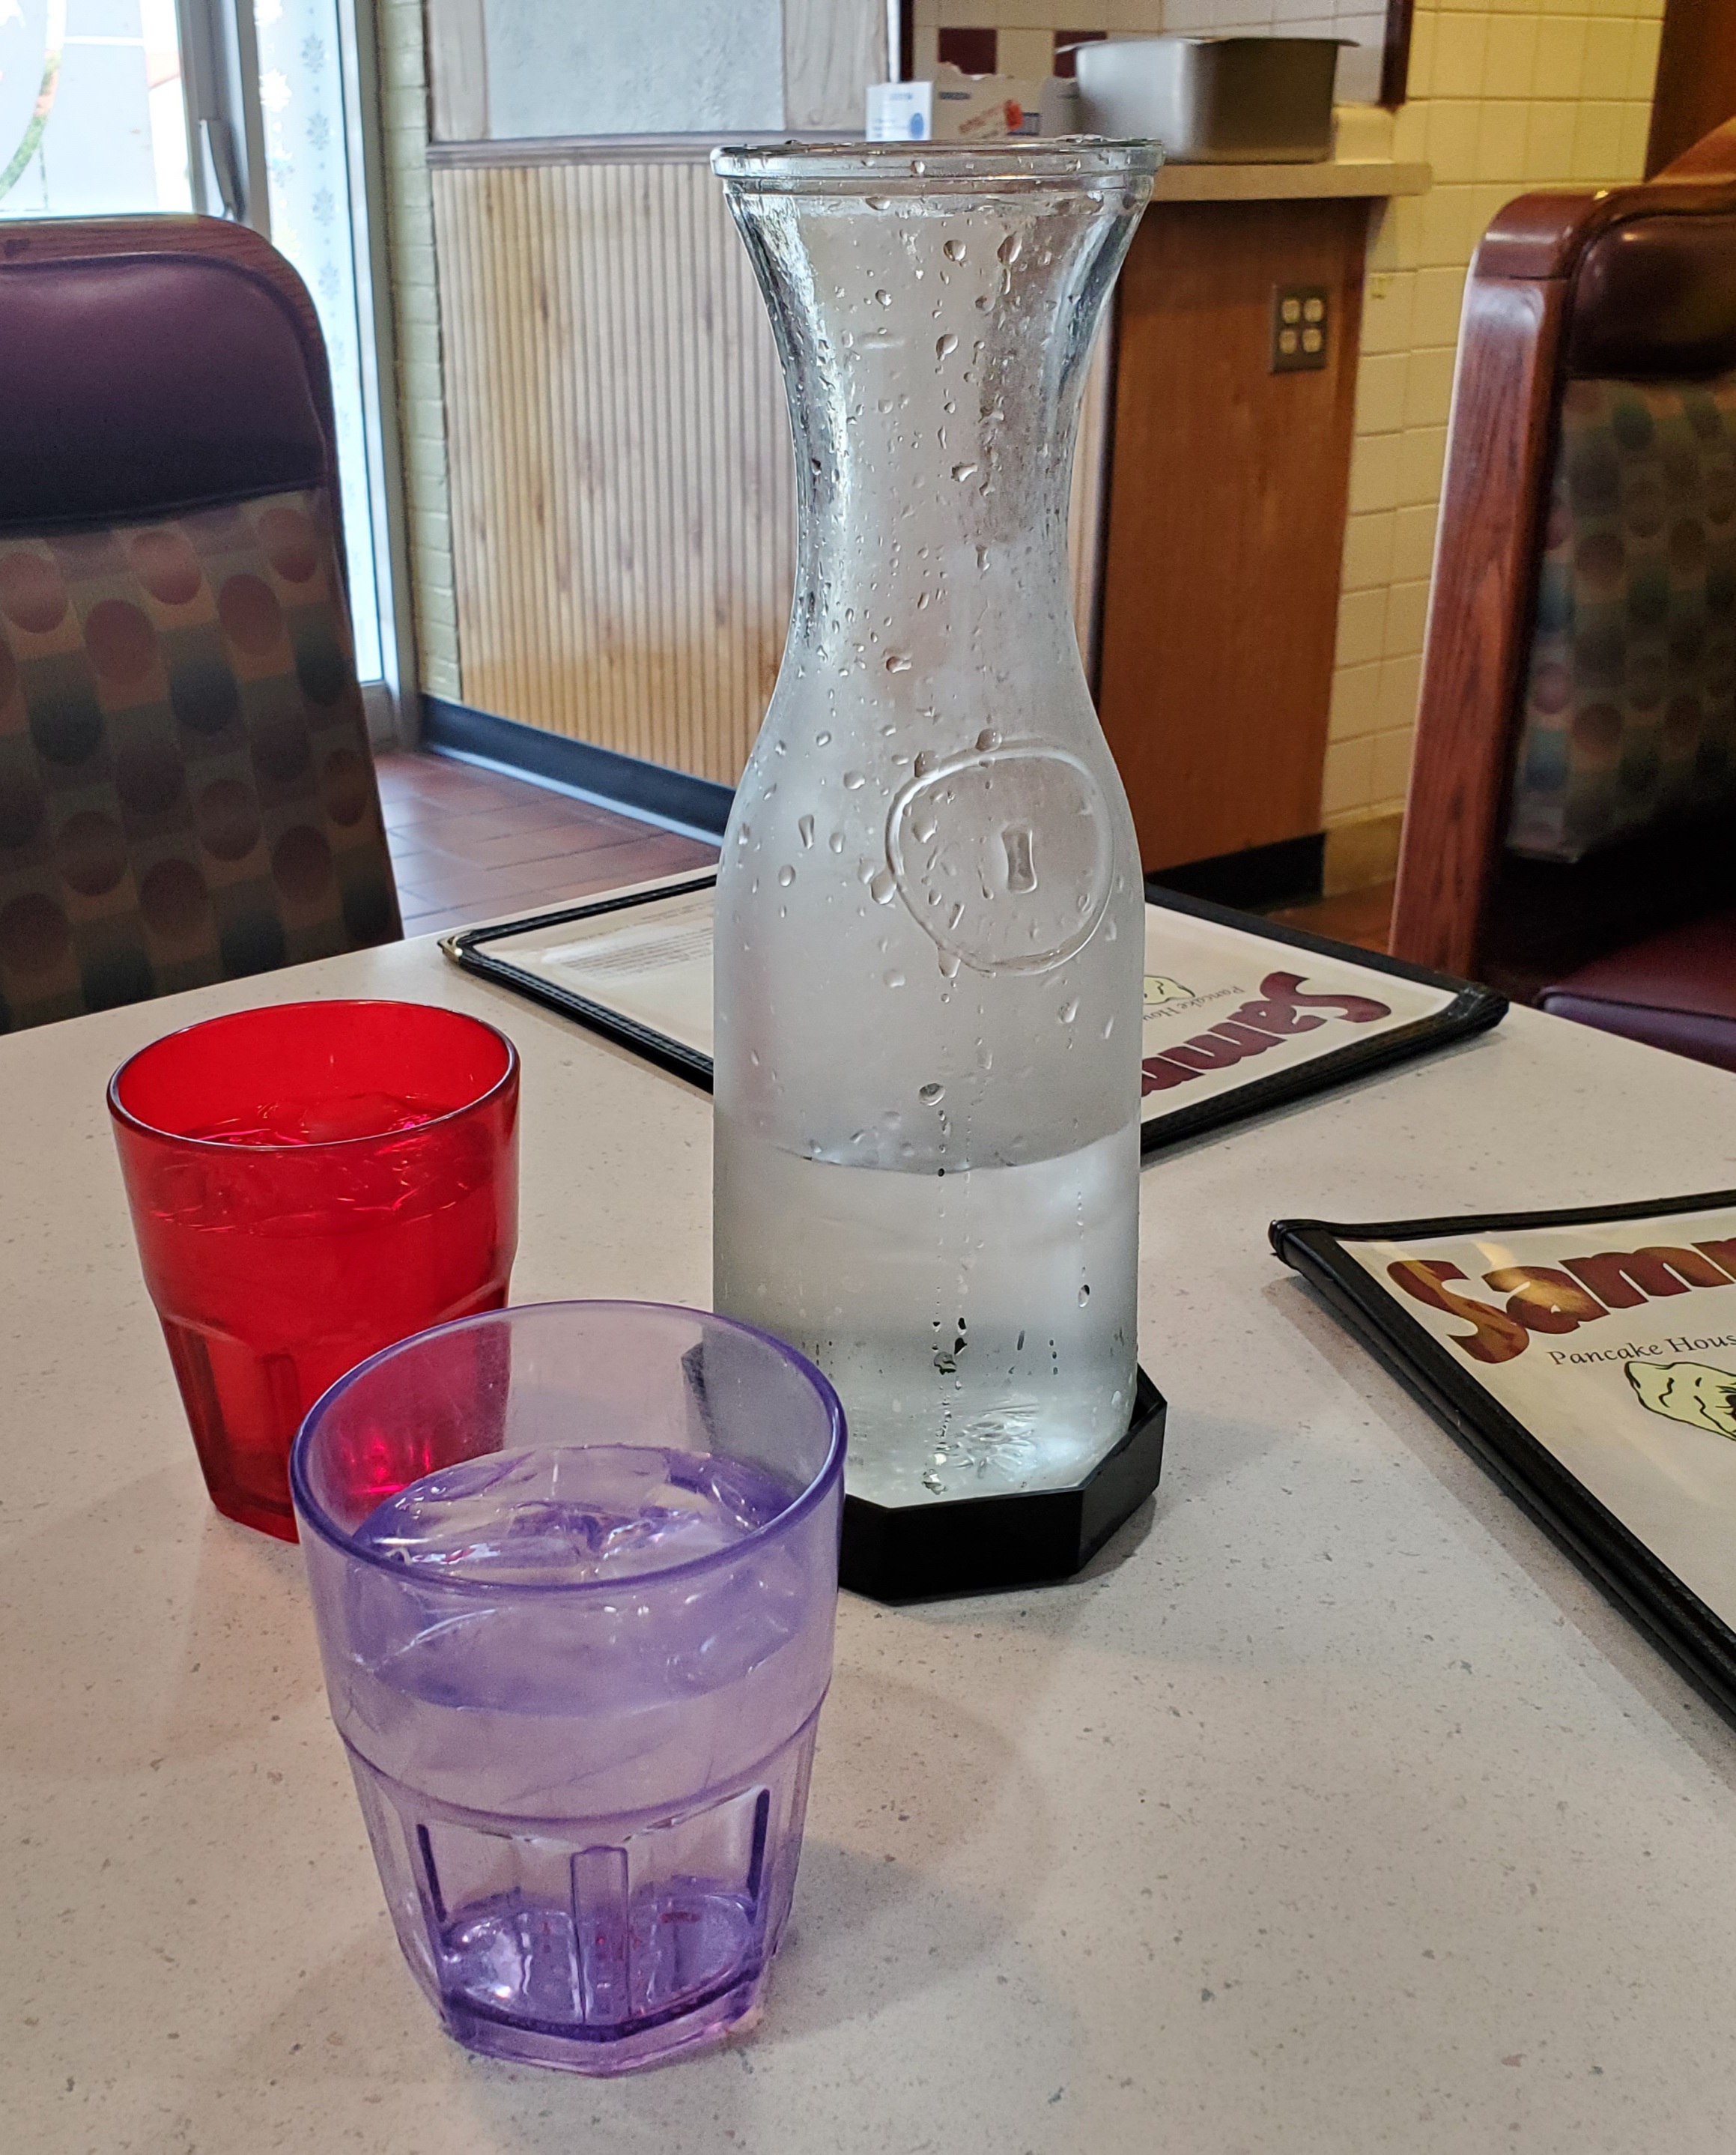 On a white speckled diner table, there are two small glasses of water and a large carafe of water. Photo by Carl Busch.